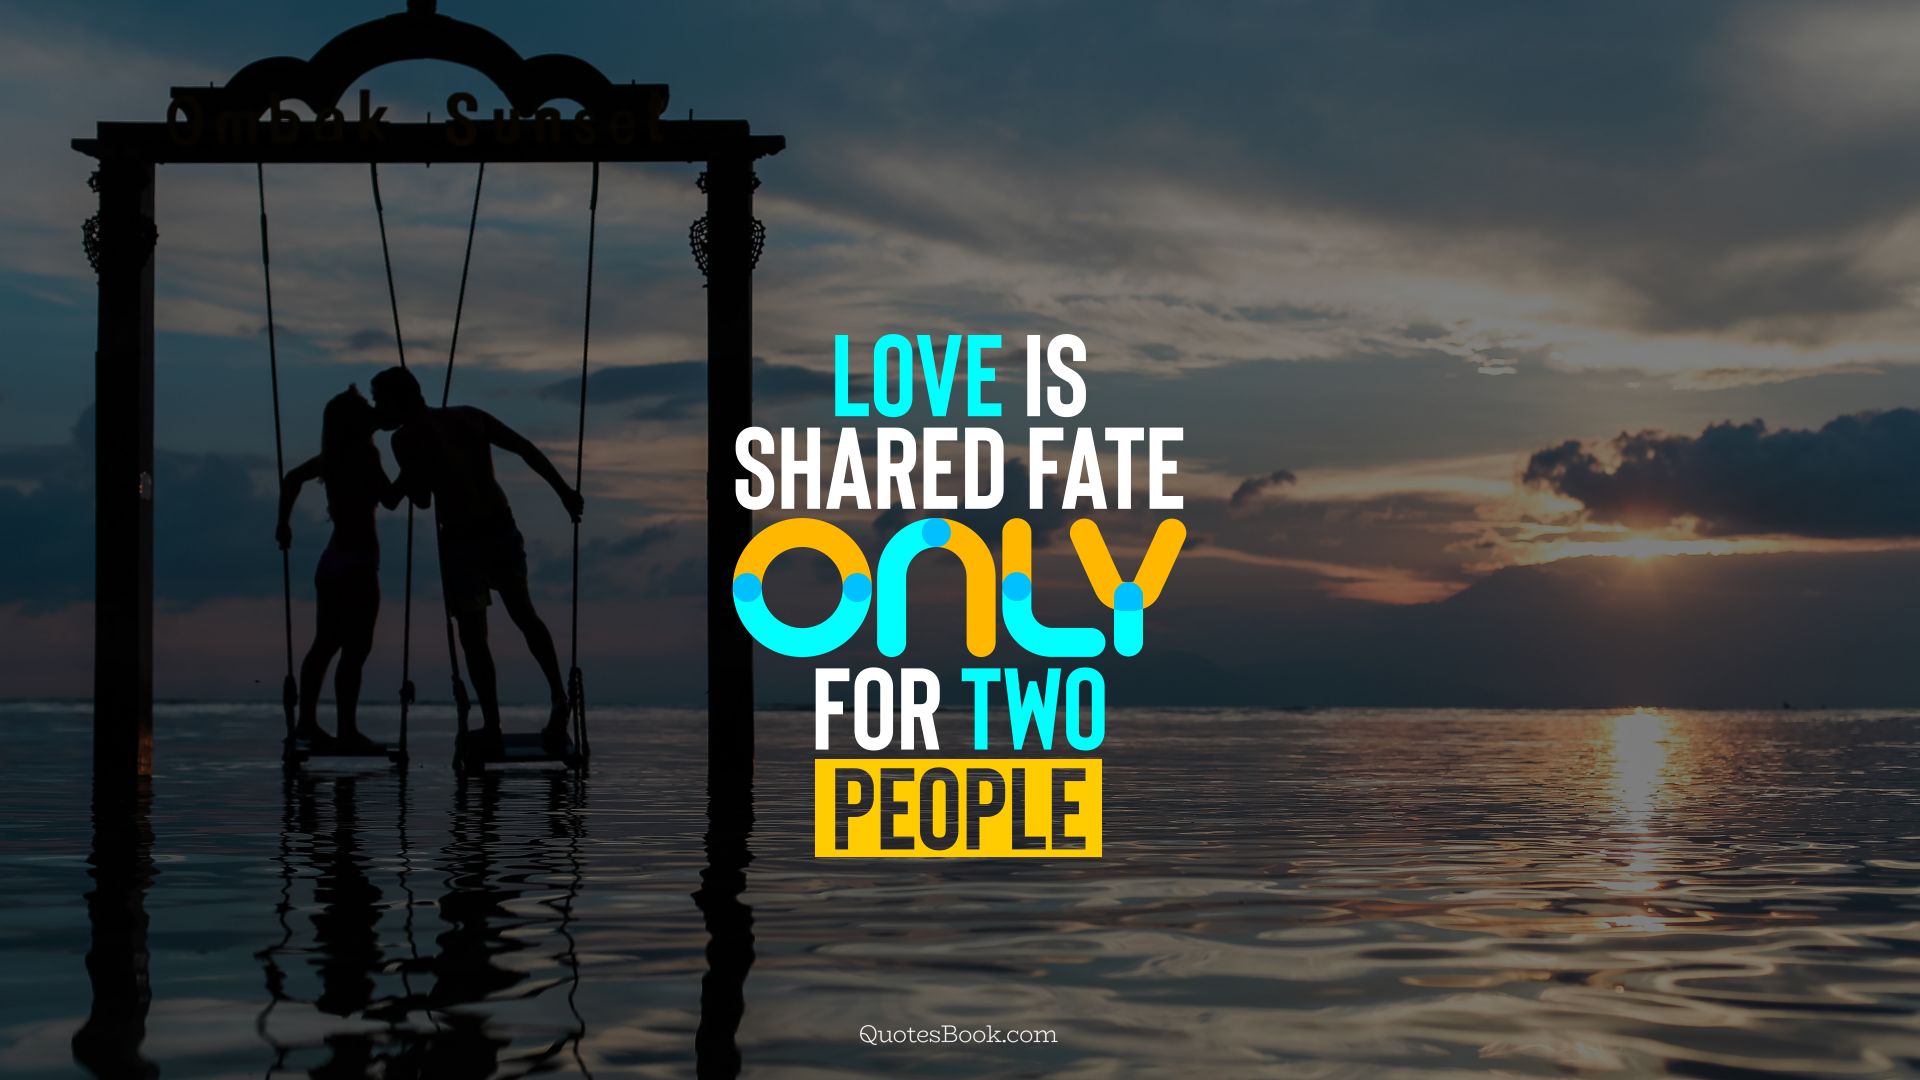 Love is shared fate only for two people. - Quote by QuotesBook